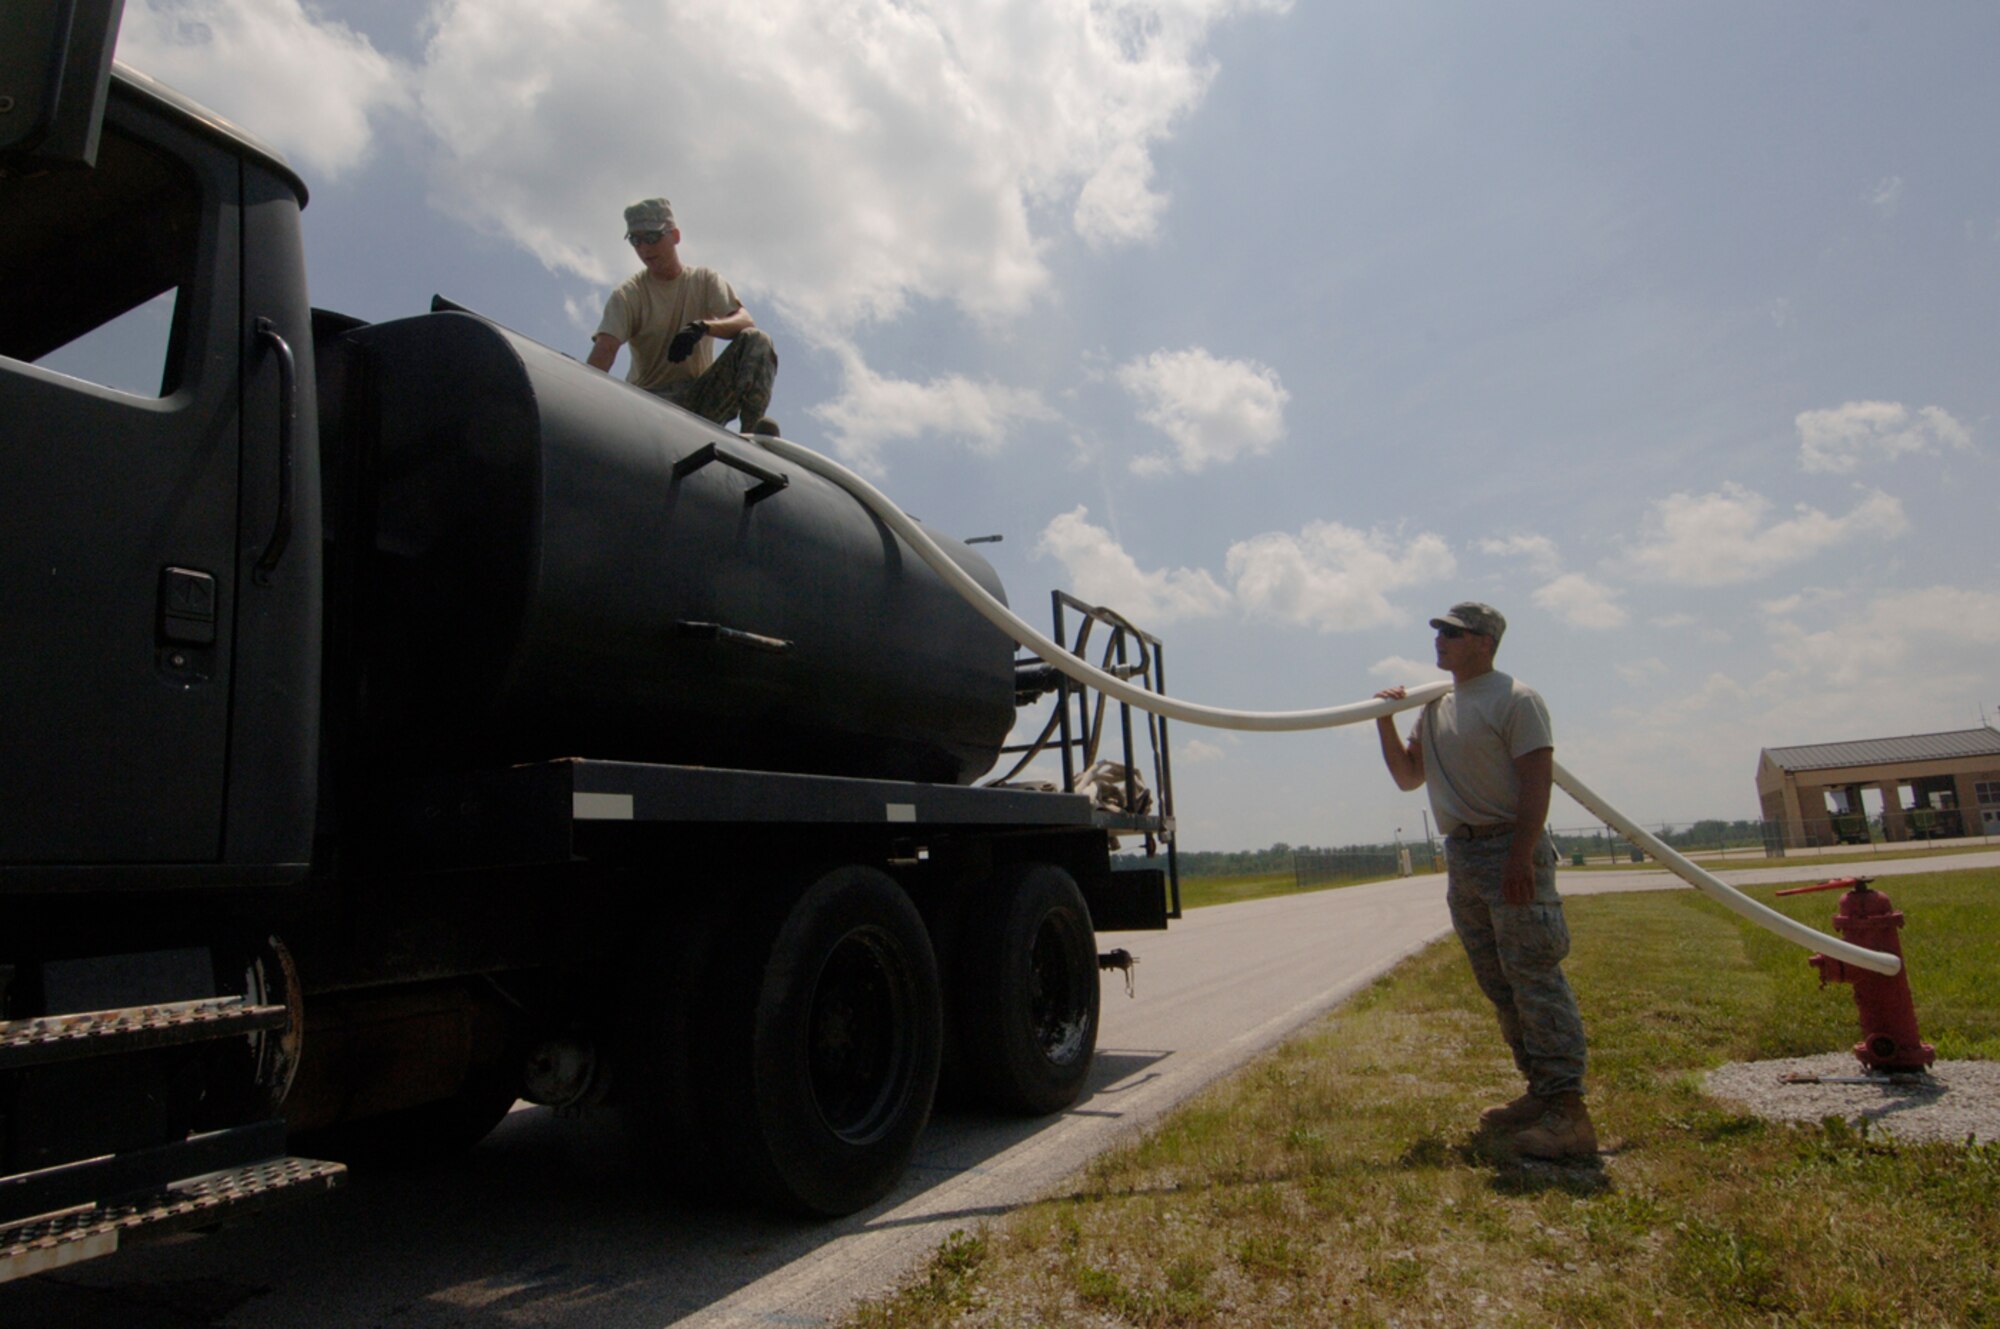 Senior Airman Aaron Reedy and Staff Sgt. Kyle Troxell, 375th Civil Engineer Squadron Operations Flight, fill up the water truck before pouring it onto a 3.2 mile course of muck, mud and hay obstacles.  More than 1,000 runners competed in the second annual USO Mud Run at Mid-America Airport June 5, 2010. The 375th CES helped construct the course and ensured its "mudworthiness" and numerous base volunteers assisted with the event.  The Airmen said they volunteered to help because it was one small way to repay the USO for all the work they do on behalf of servicemembers everywhere. (Photo by Karen Petitt/375th AMW/PA)
